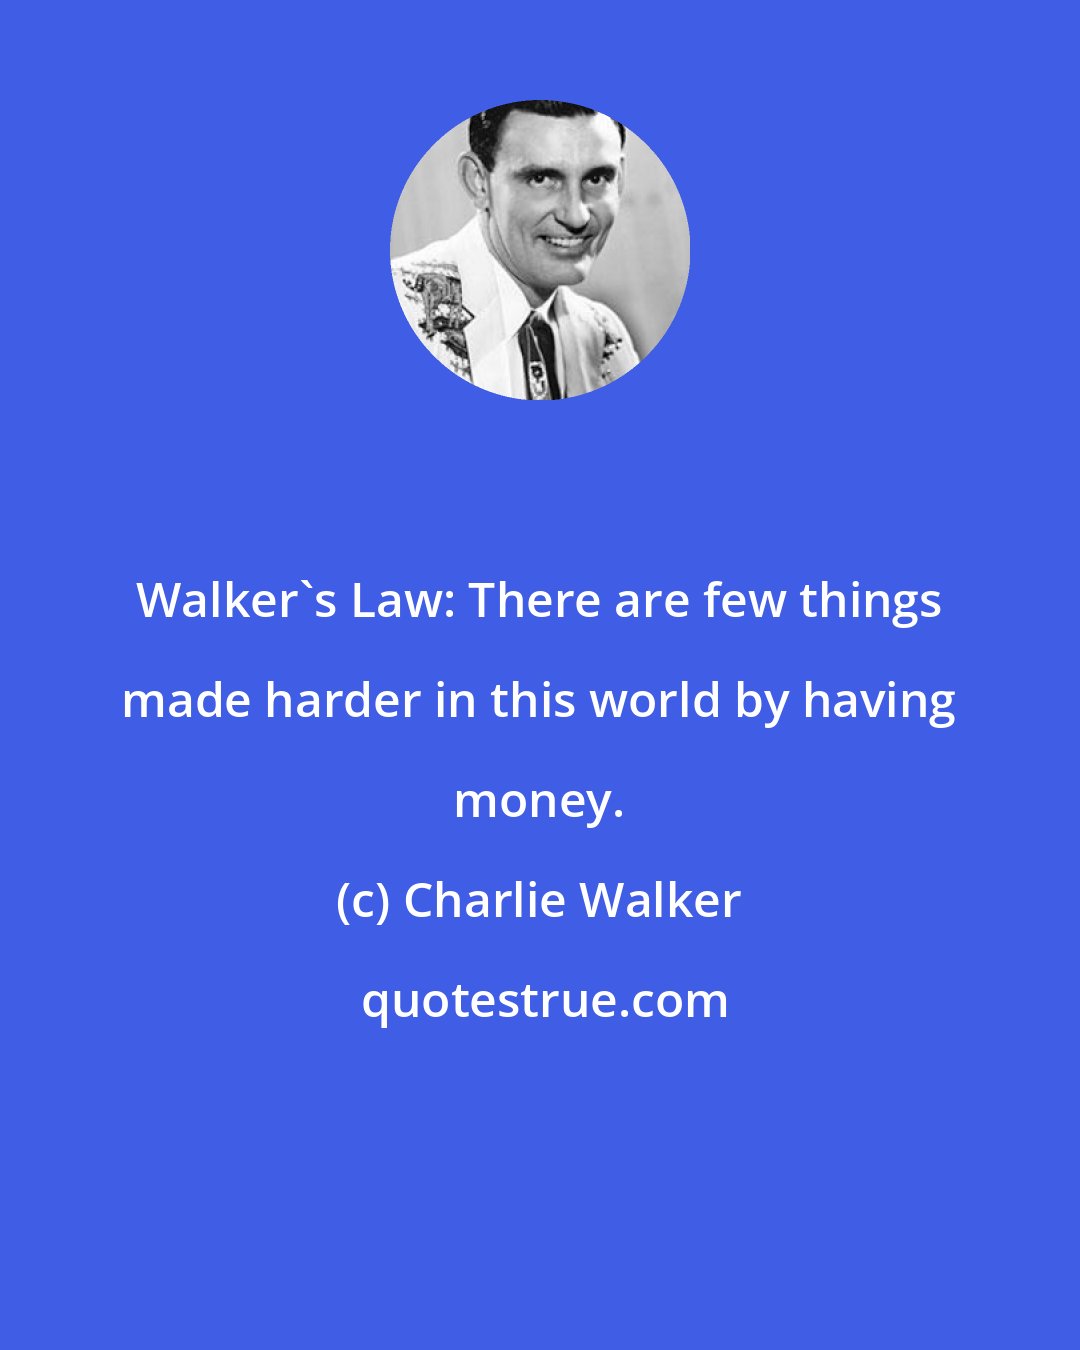 Charlie Walker: Walker's Law: There are few things made harder in this world by having money.